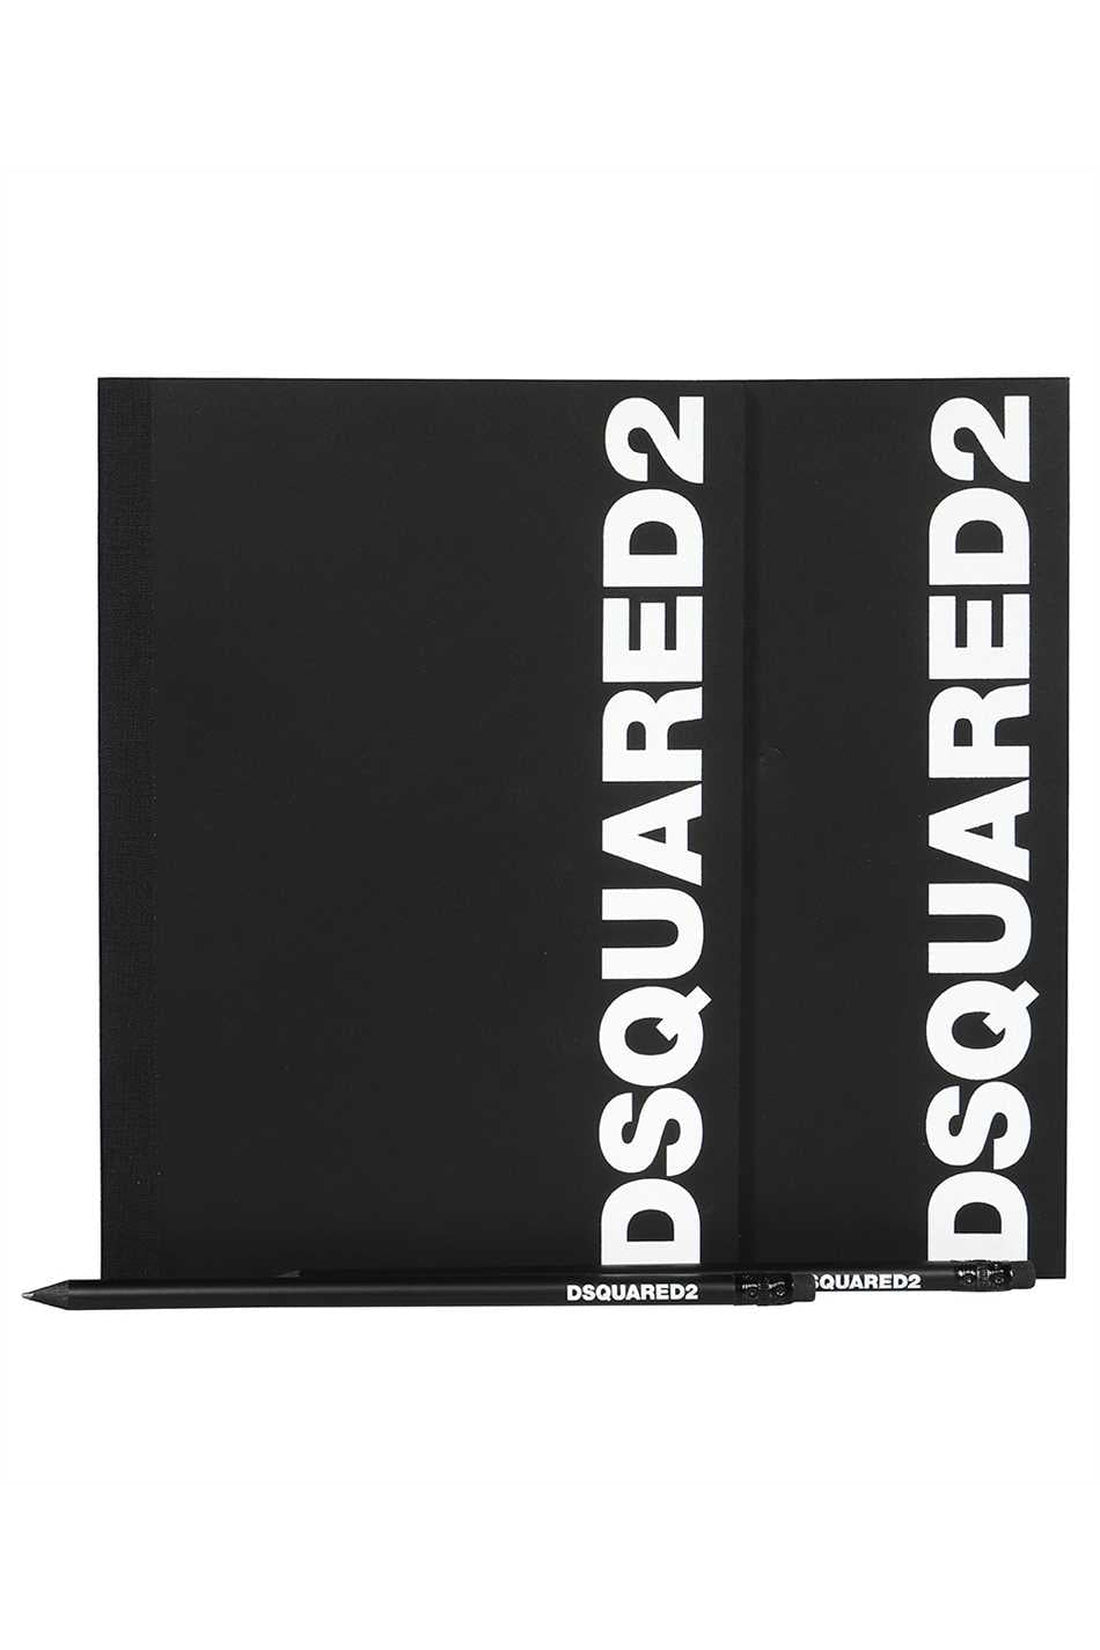 Dsquared2-OUTLET-SALE-Set of two logo-print notebook-ARCHIVIST